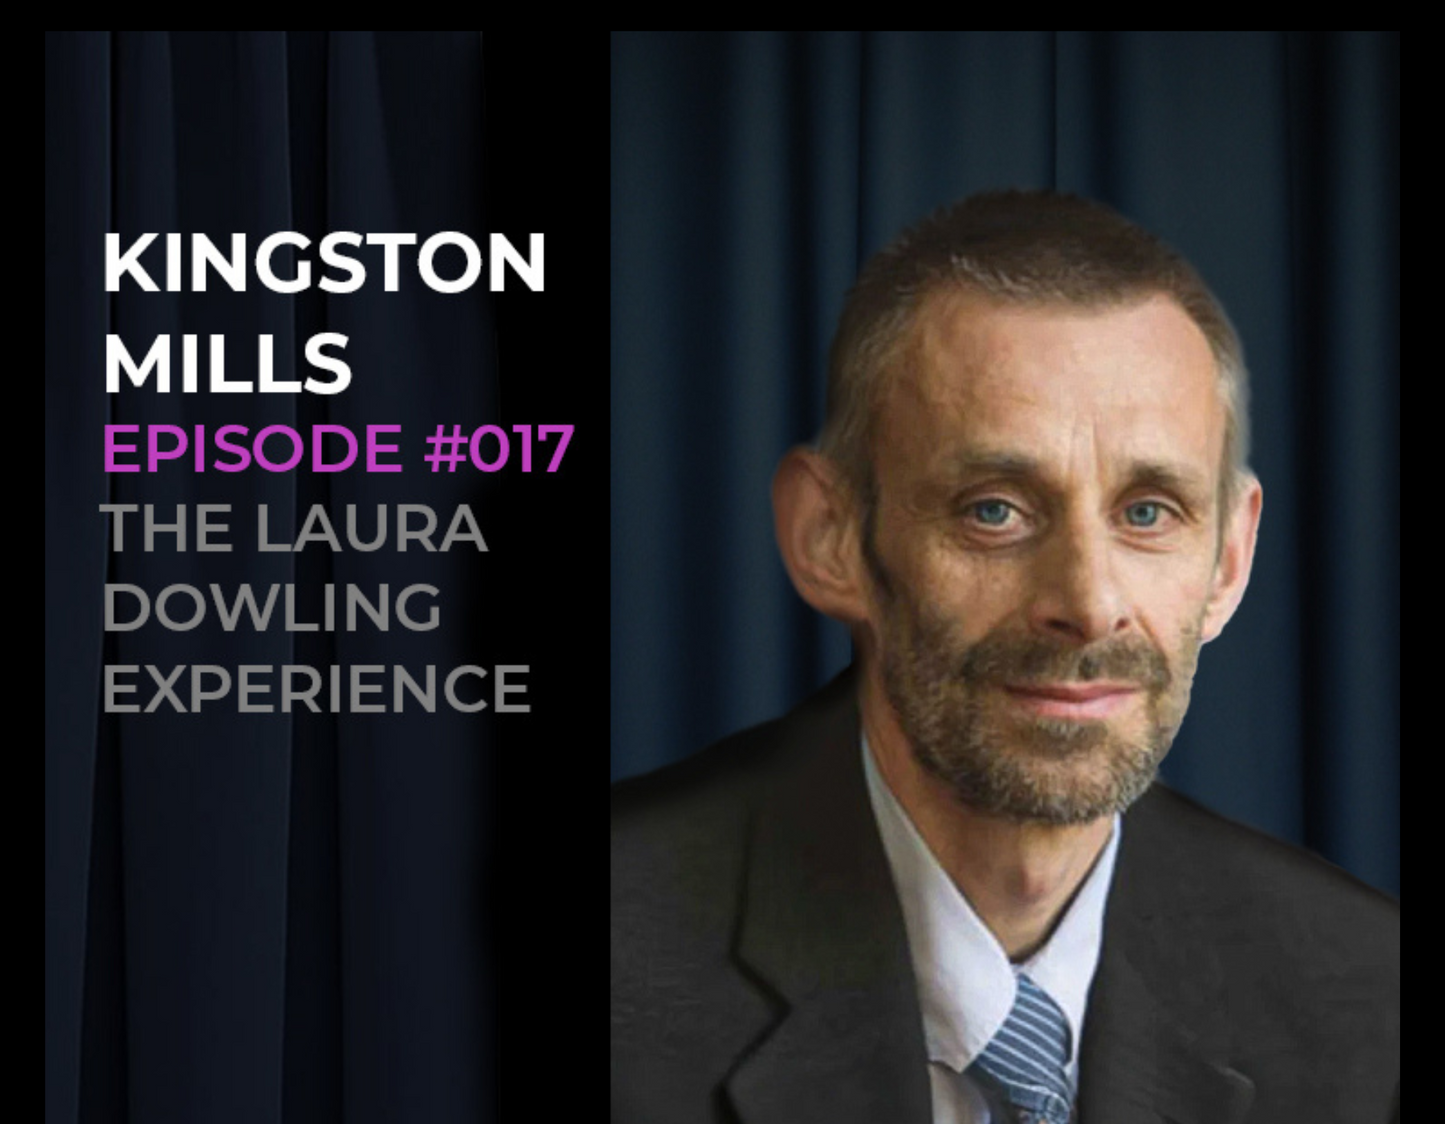 Prof. Kingston Mills: Immunology, preventing alzheimer's, vaccines for cancer & HIV and athletics Episode #017